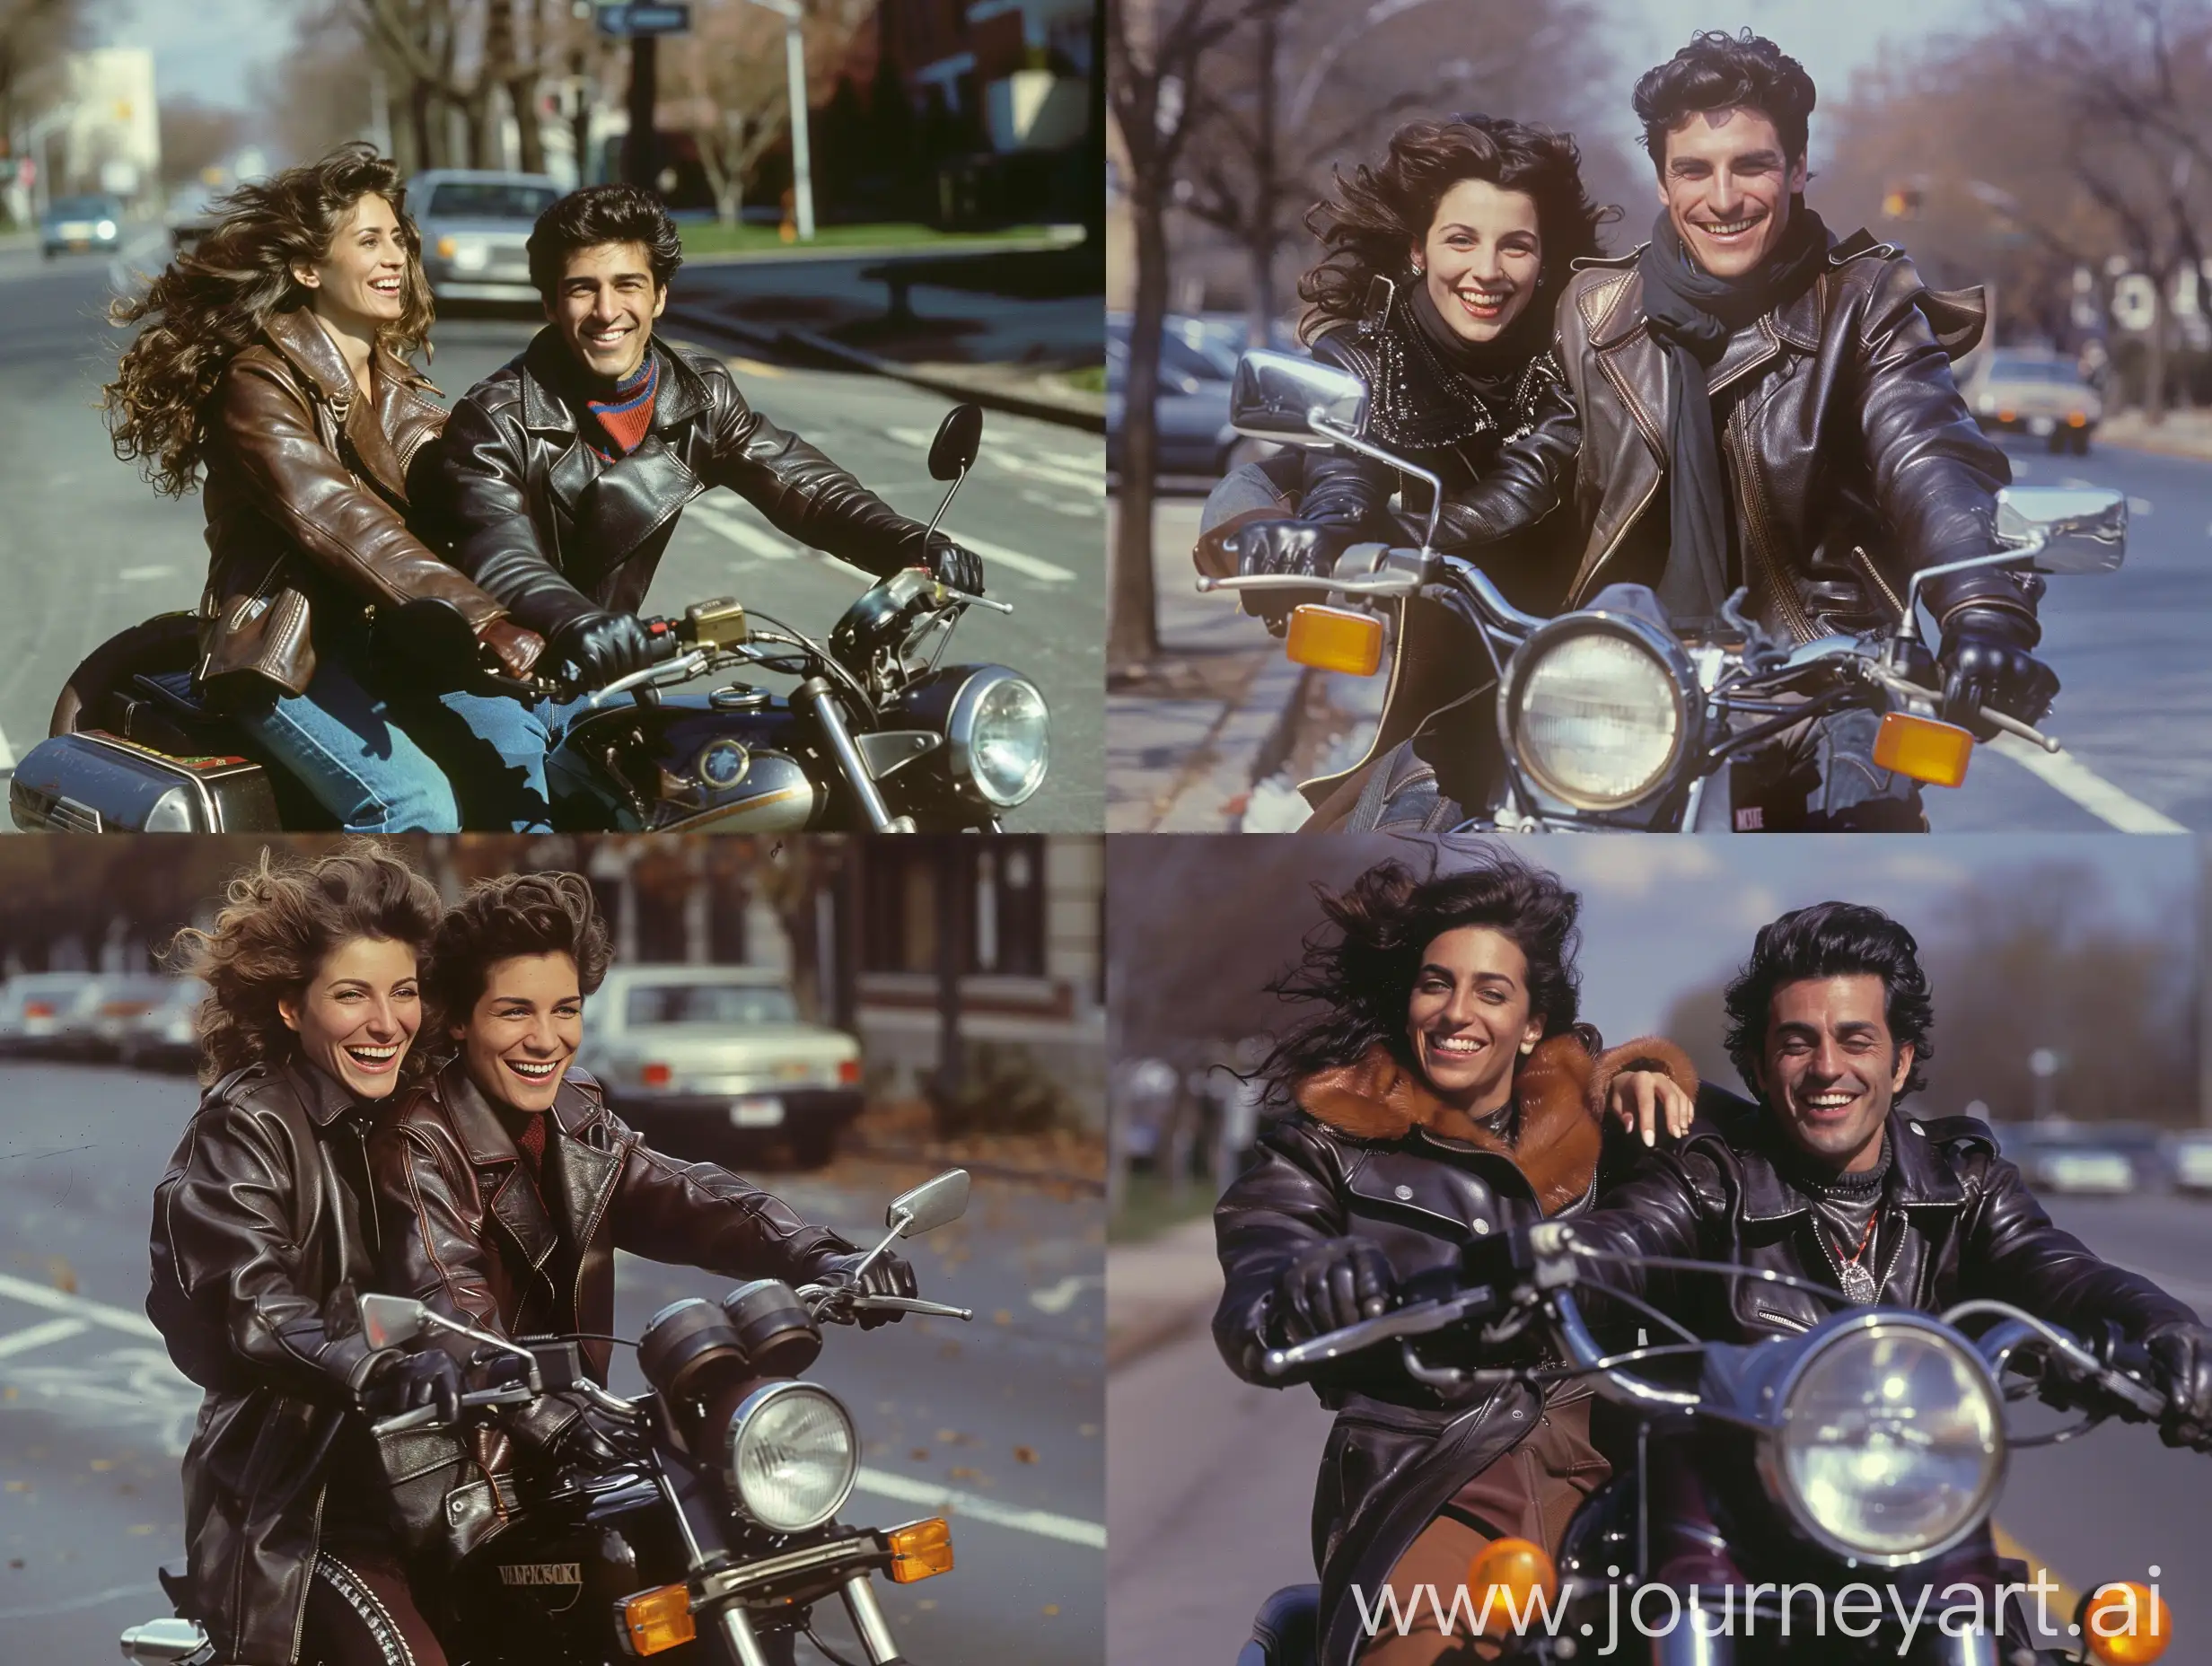 1980s stylish Italian man and woman wearing leather coat, riding on a 1980s motorcycle and smiling, streetsnof New York suburbs background